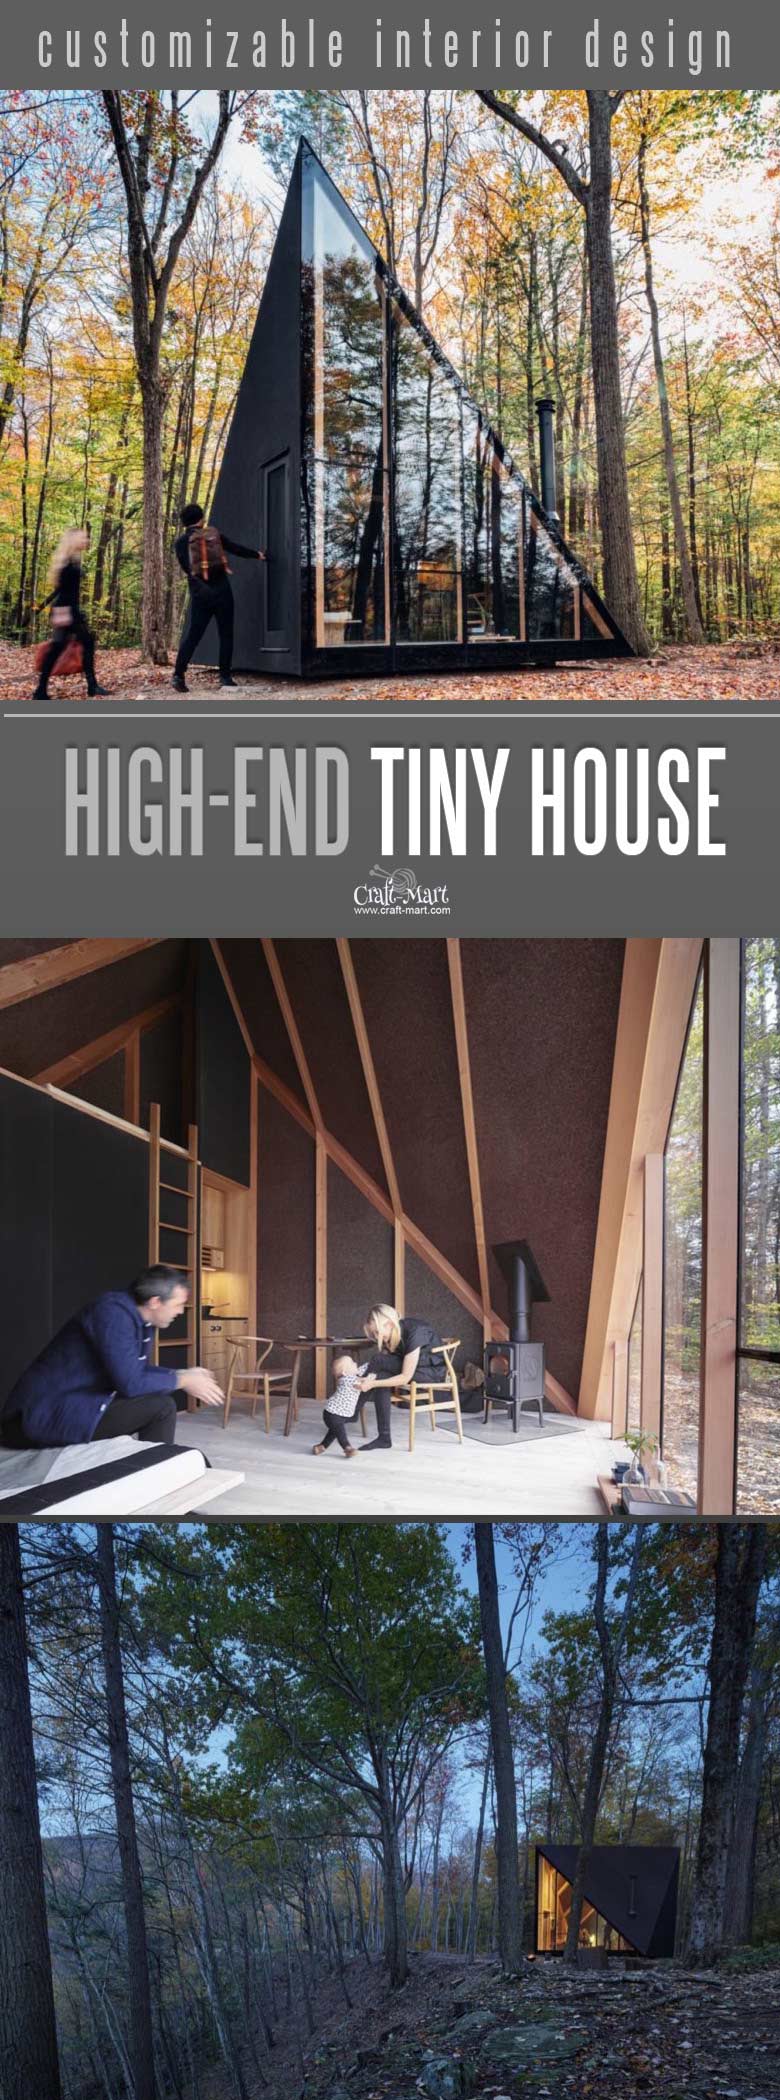 Look at this absolutely awesome High-end custom tiny house that you can afford! You can add custom features from most of the tiny home builders. Keep dreaming on or take an action and get one of these little affordable homes!#tinyhouseplans #tinyhome #tinyhouses #diywoodcrafts #diyproject #realestate #smallhouseplans 